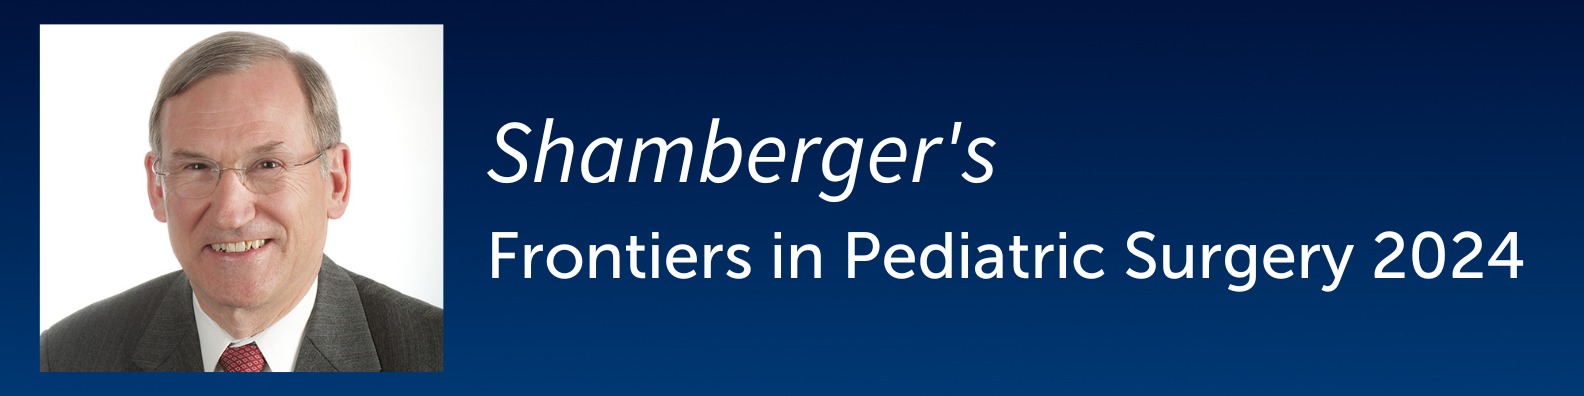 Shamberger's Frontiers in Pediatric Surgery 2024 Banner